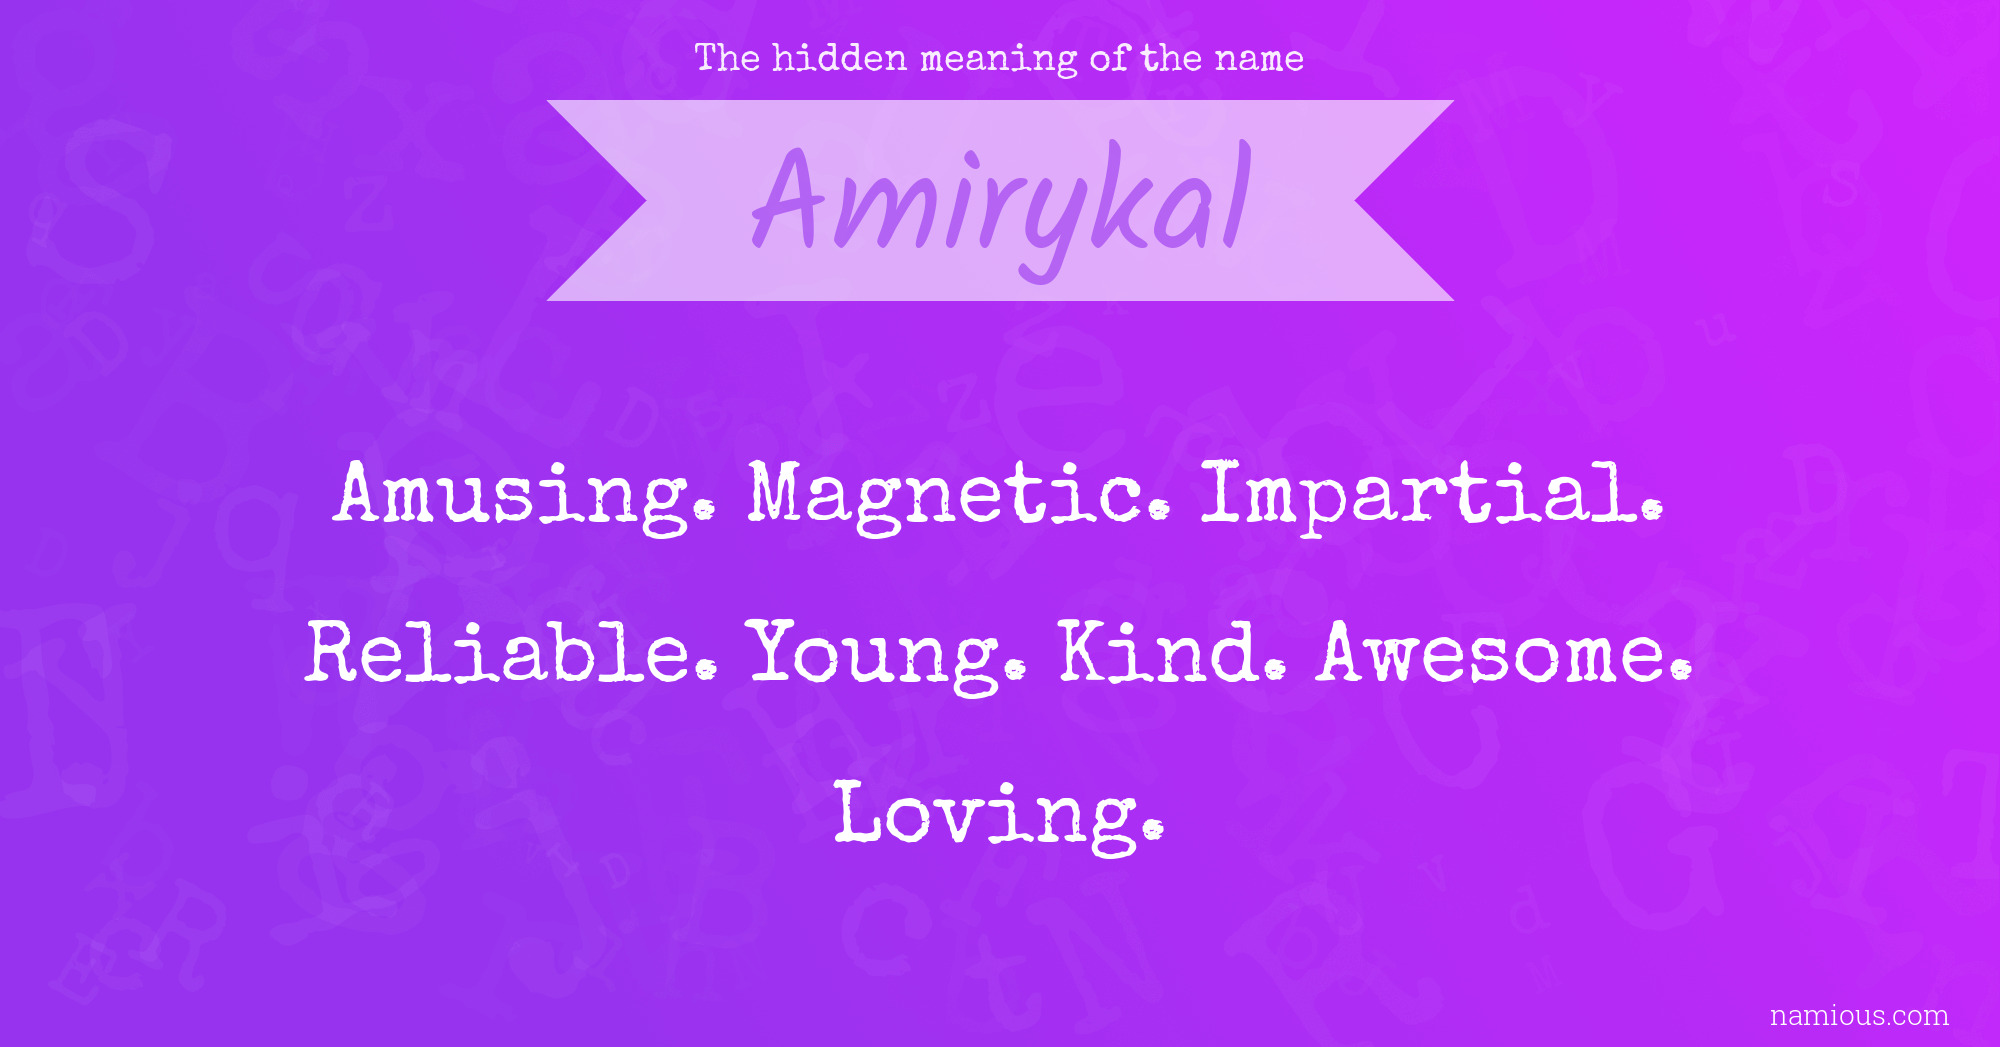 The hidden meaning of the name Amirykal